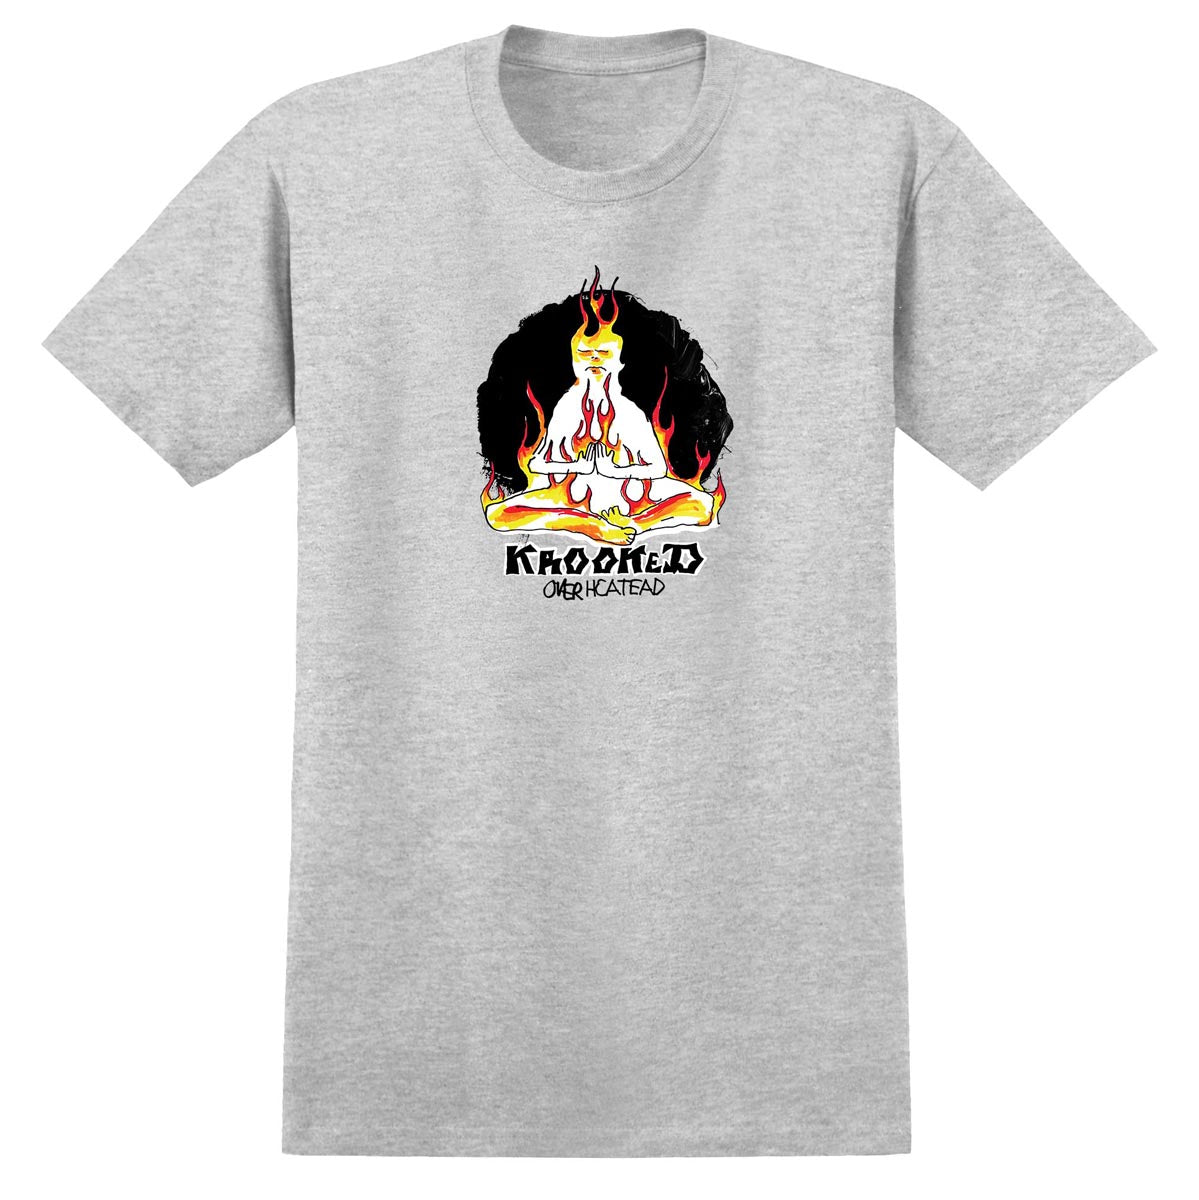 Krooked Over Heated T-Shirt - Sport Grey image 1